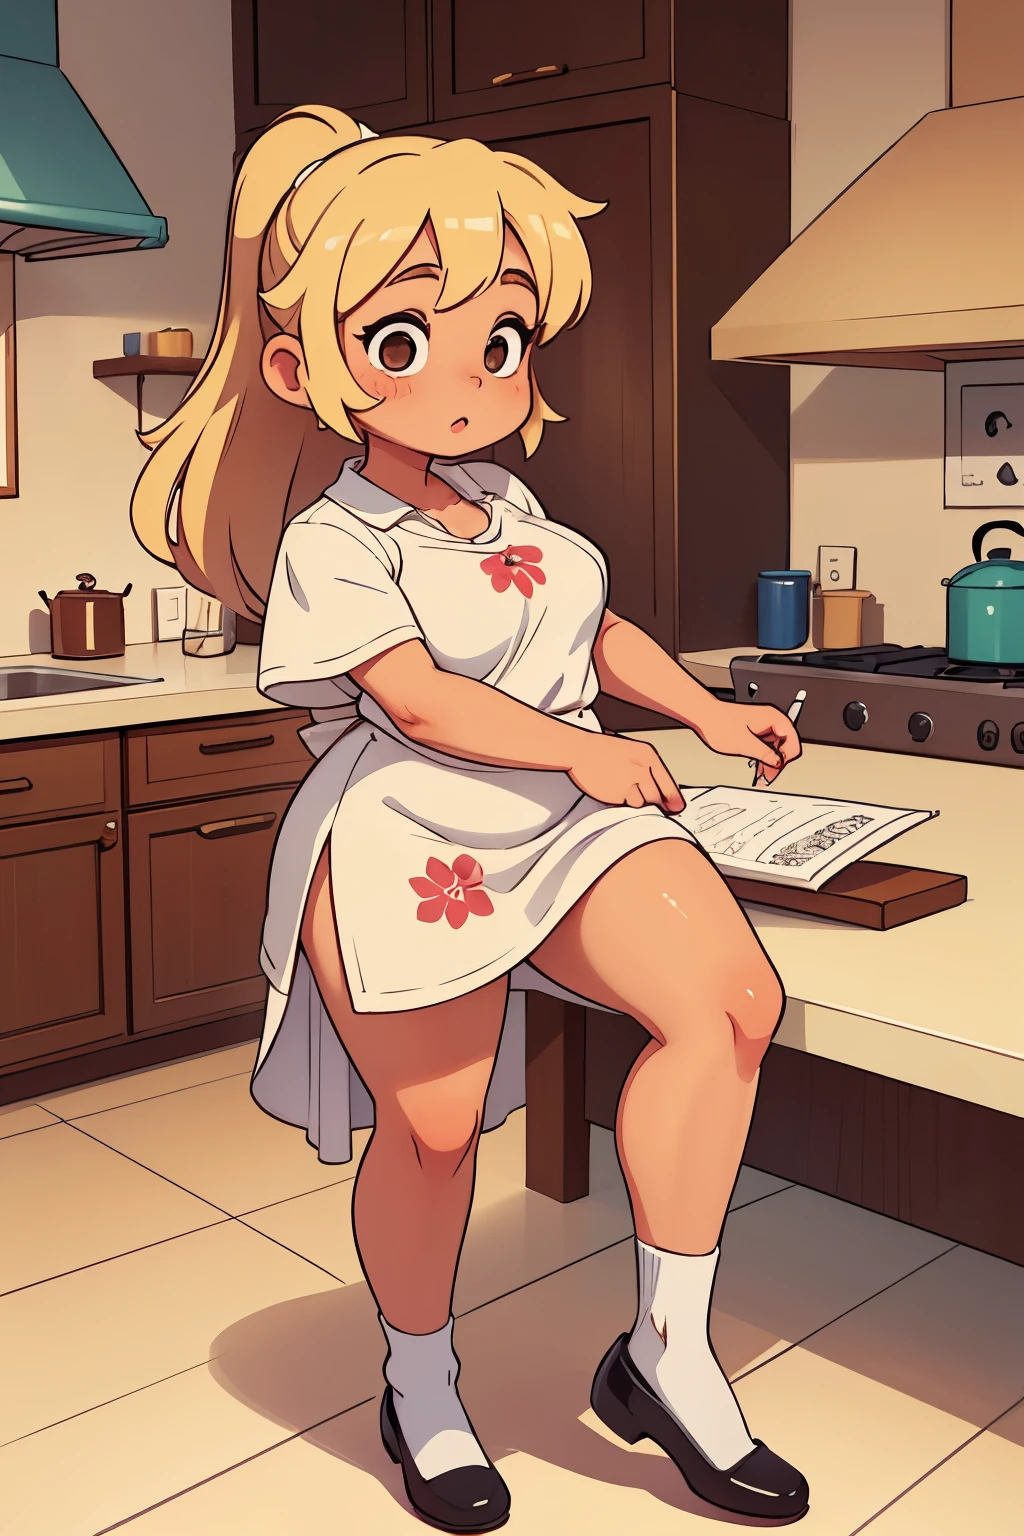 Drawing of a pudgy teen of late adolescence with rosy cheeks; brown eyes; muscular, toned, athletic, veiny, very thick, fat, Rubenesque chubby legs and feet; creamy blonde hairs. Her fat legs have varicose veins. She is in a white dress with a prominent bow on her waist; she is wearing black dress shoes. She is standing in a kitchen on her phone. Her floral panties are showing.